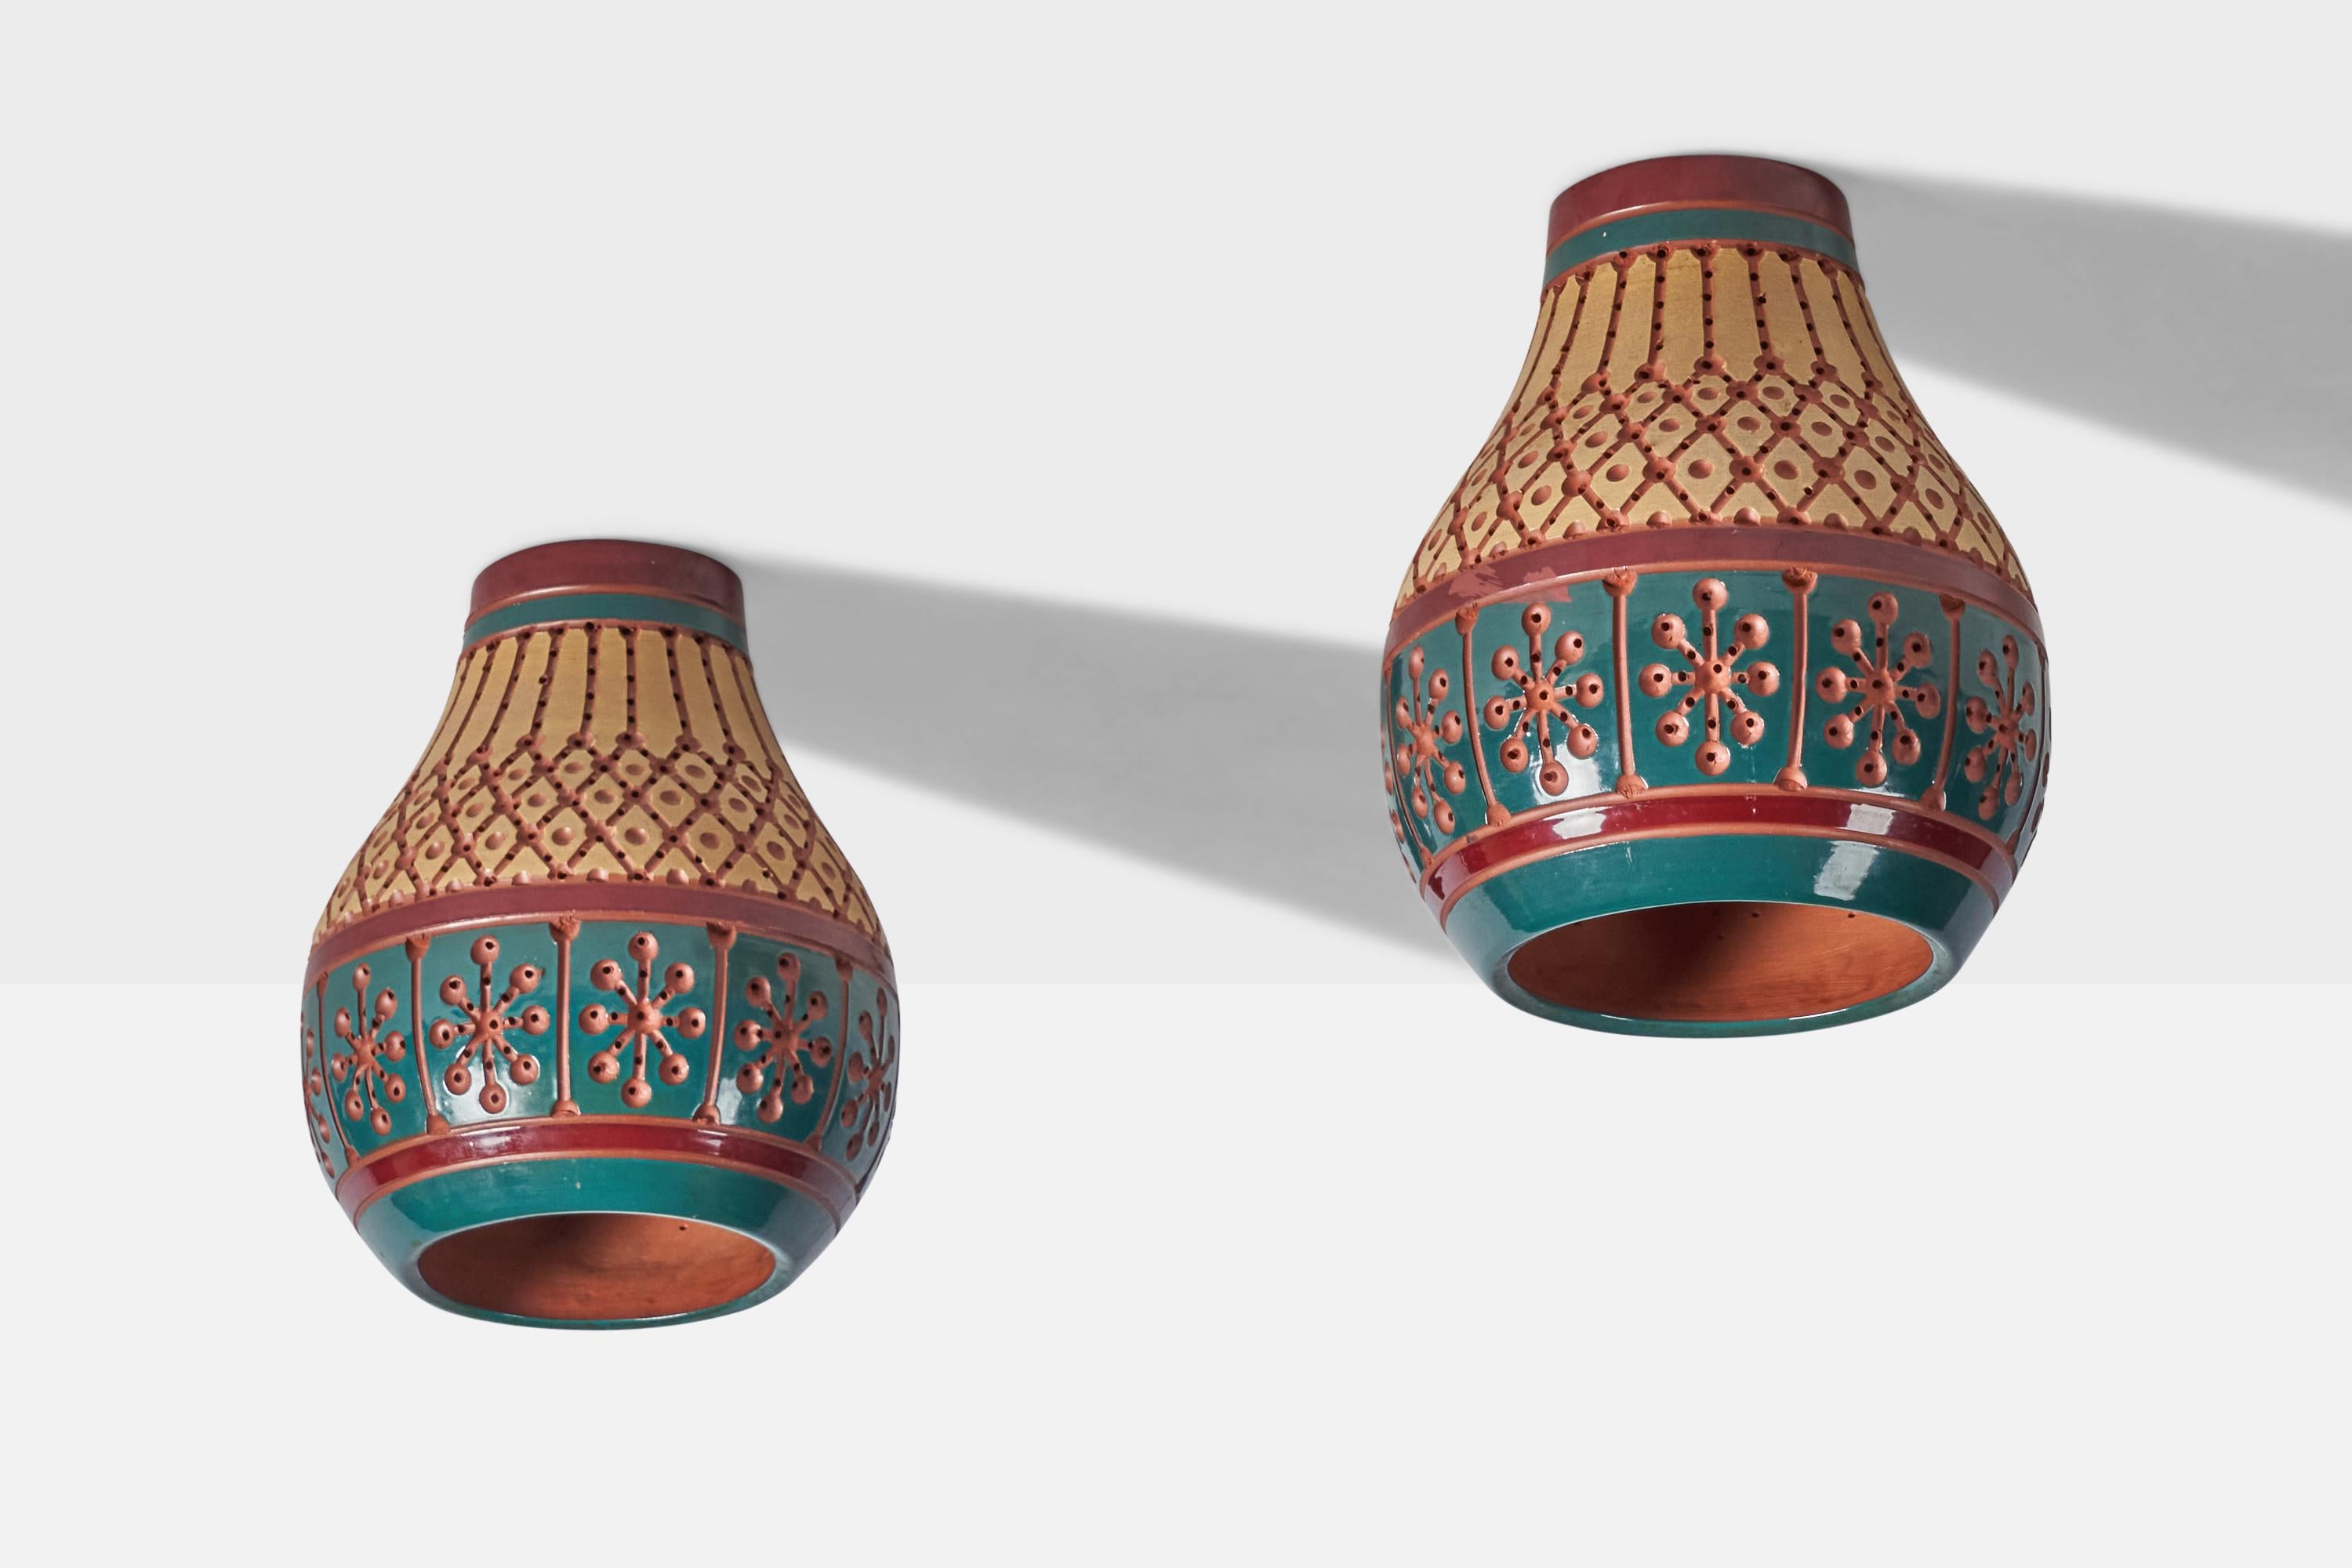 A pair of hand-painted yellow, blue and red flush mounts or pendant lights, designed and produced by Martha & Beaumont Mood, San Antonio, Texas, USA, 1970s.

Overall Dimensions (inches): 12.5” H x 11” Diameter
Bulb Specifications: E-26 Bulb
Number